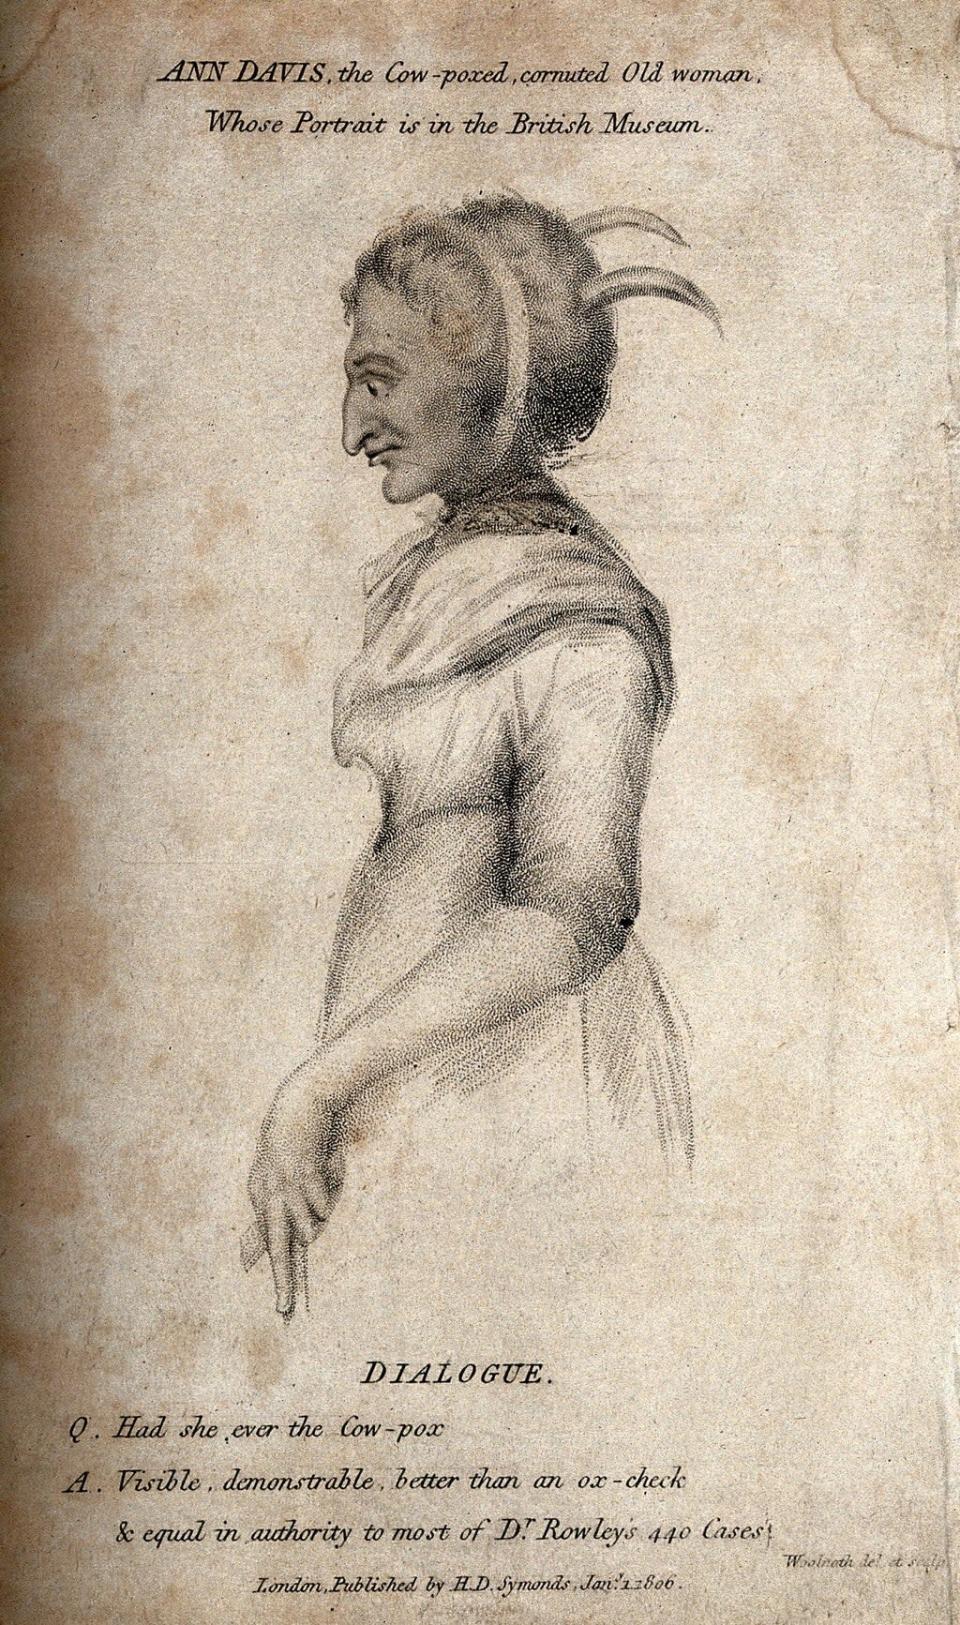 Ann Davis, a sketch of a woman with smallpox and horns growing out of her head, 1806. (Wellcome Library)